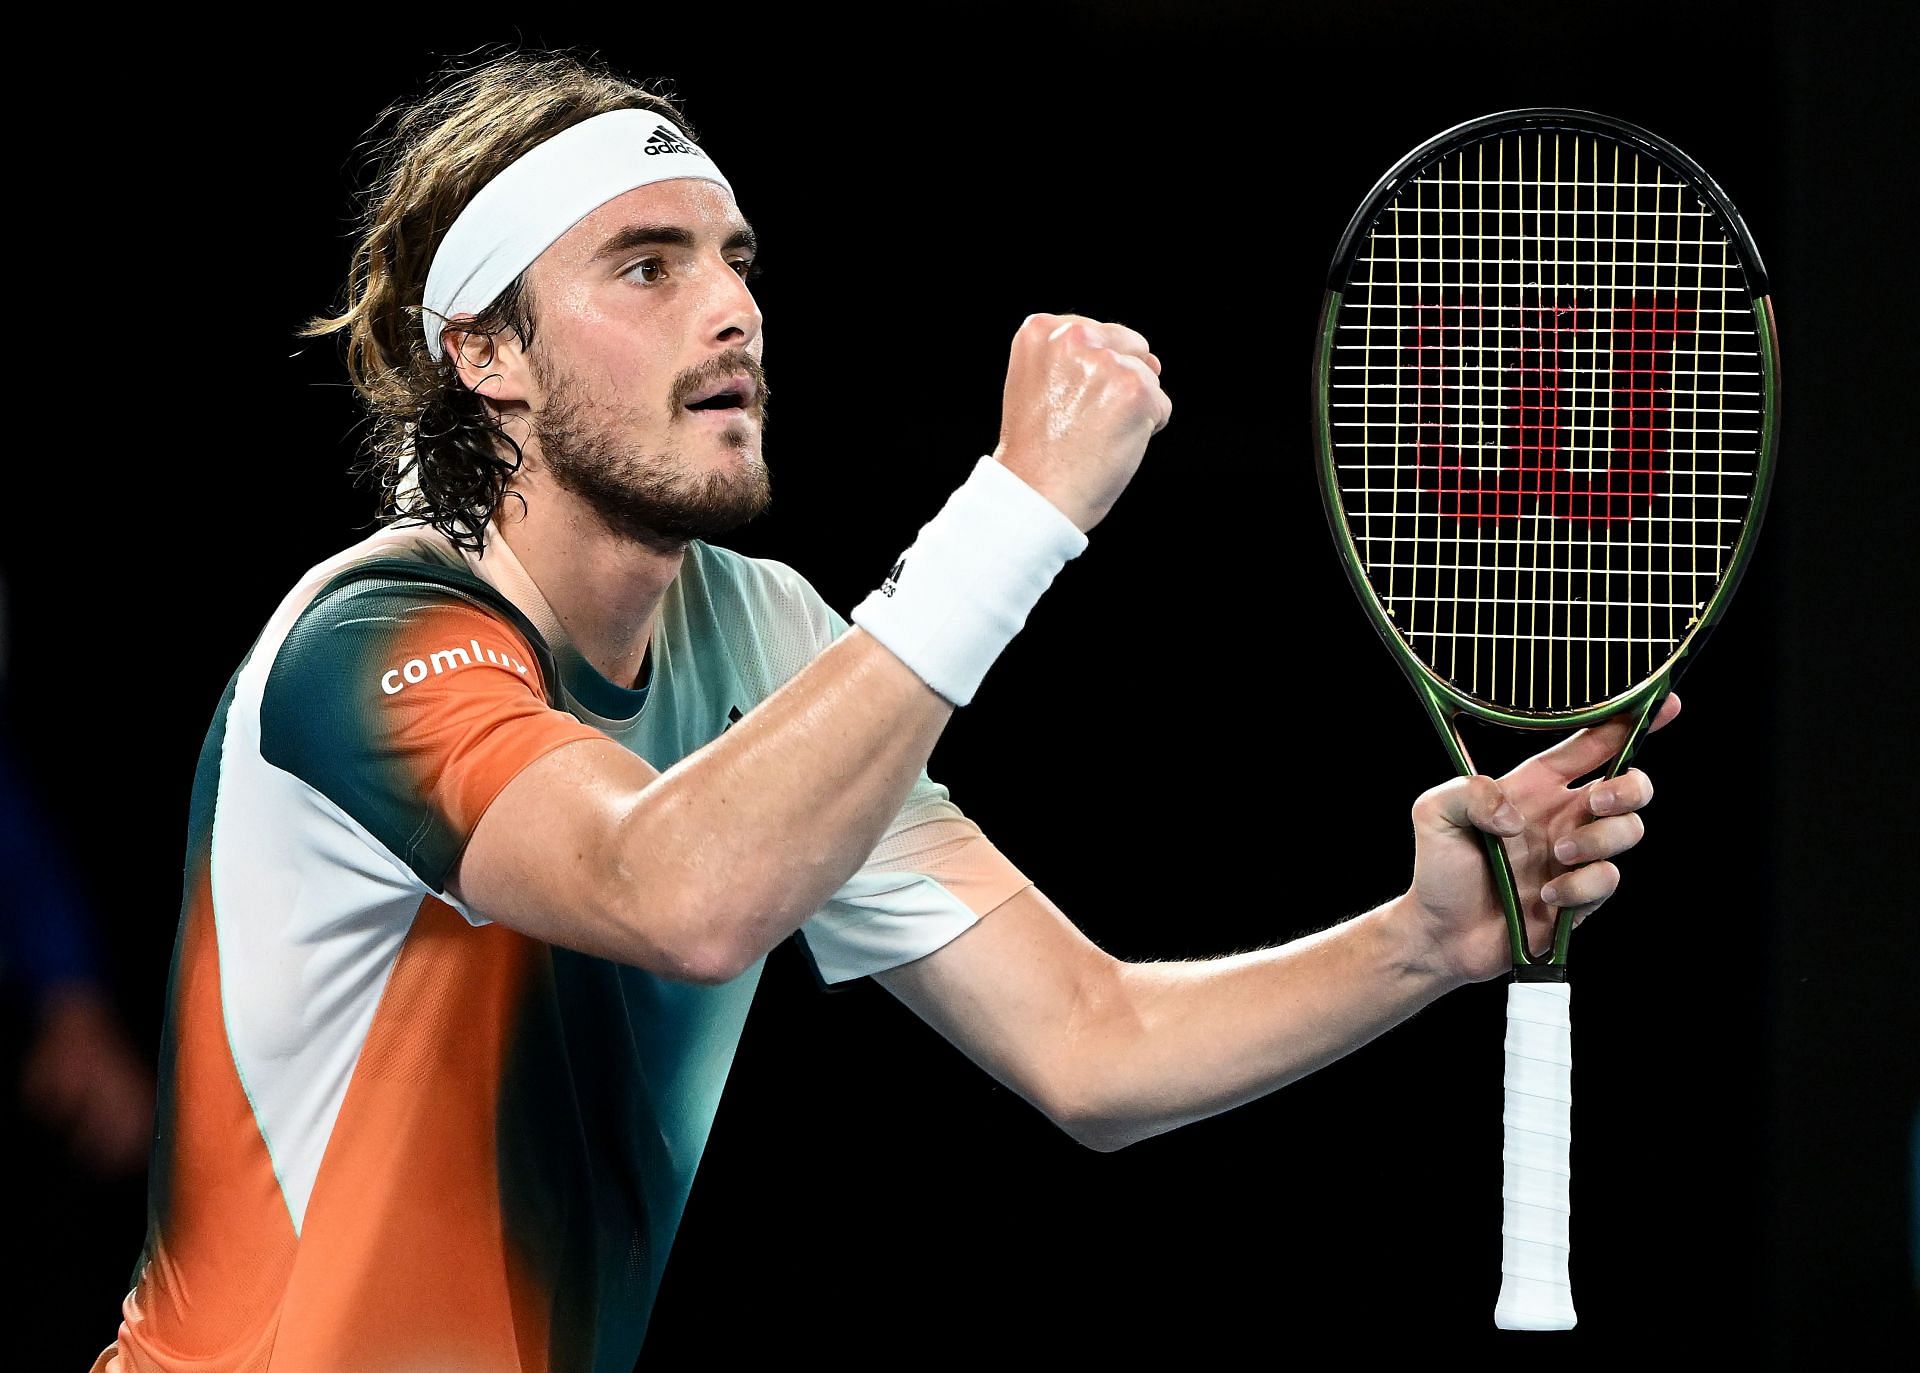 Stefanos Tsitsipas during his win over Taylor Fritz at the 2022 Australian Open